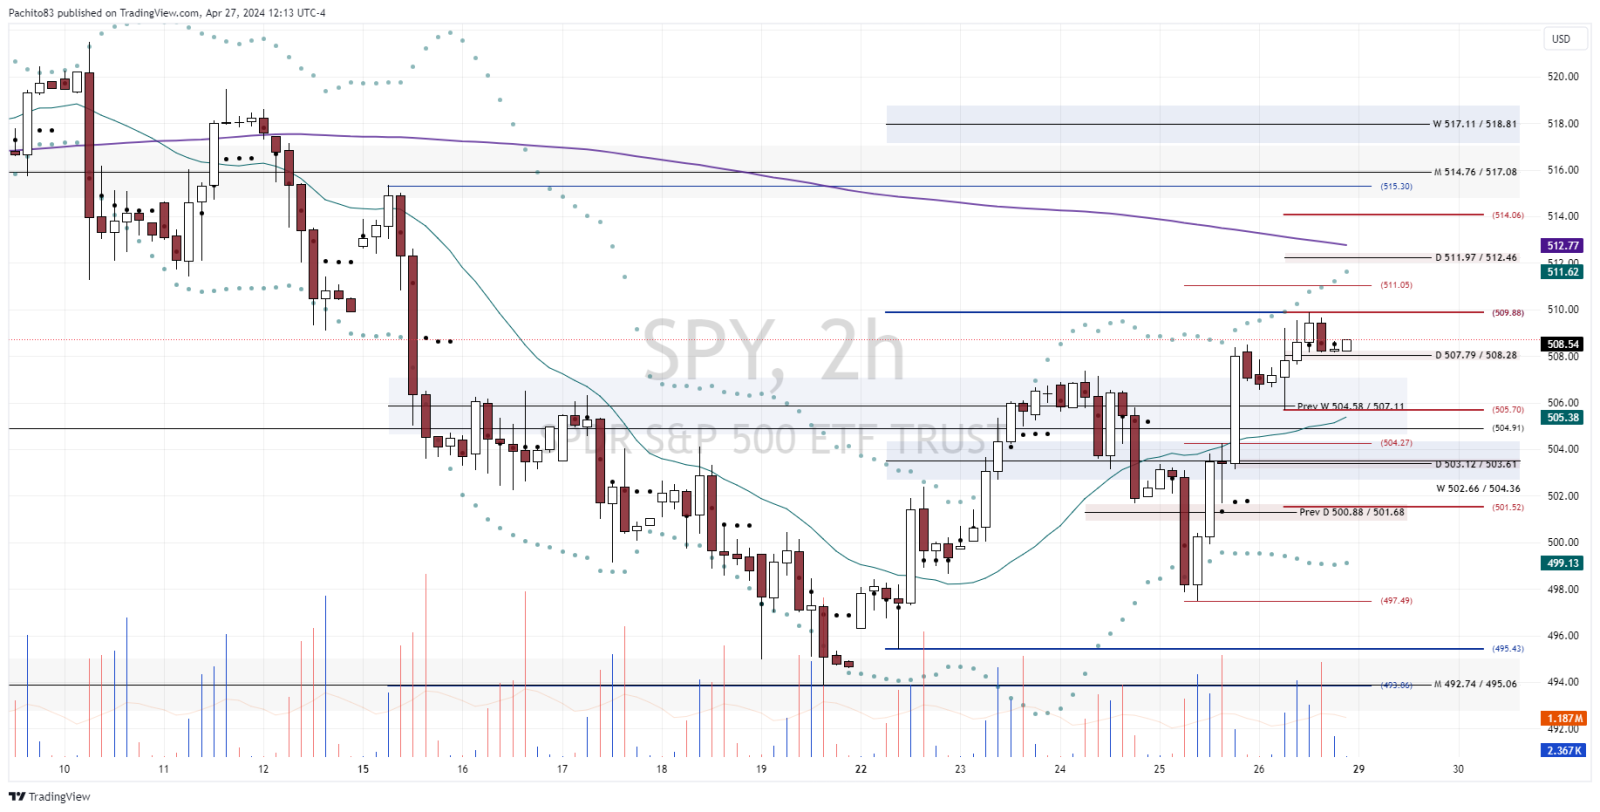 $SPDR S&P 500 ETF (SPY.US)$ above 507.79 / 508.28 for a 509.88 test. 509.88 is a key level (wkly resistance) to break for a continuation to 511.97/512.46. a bre...